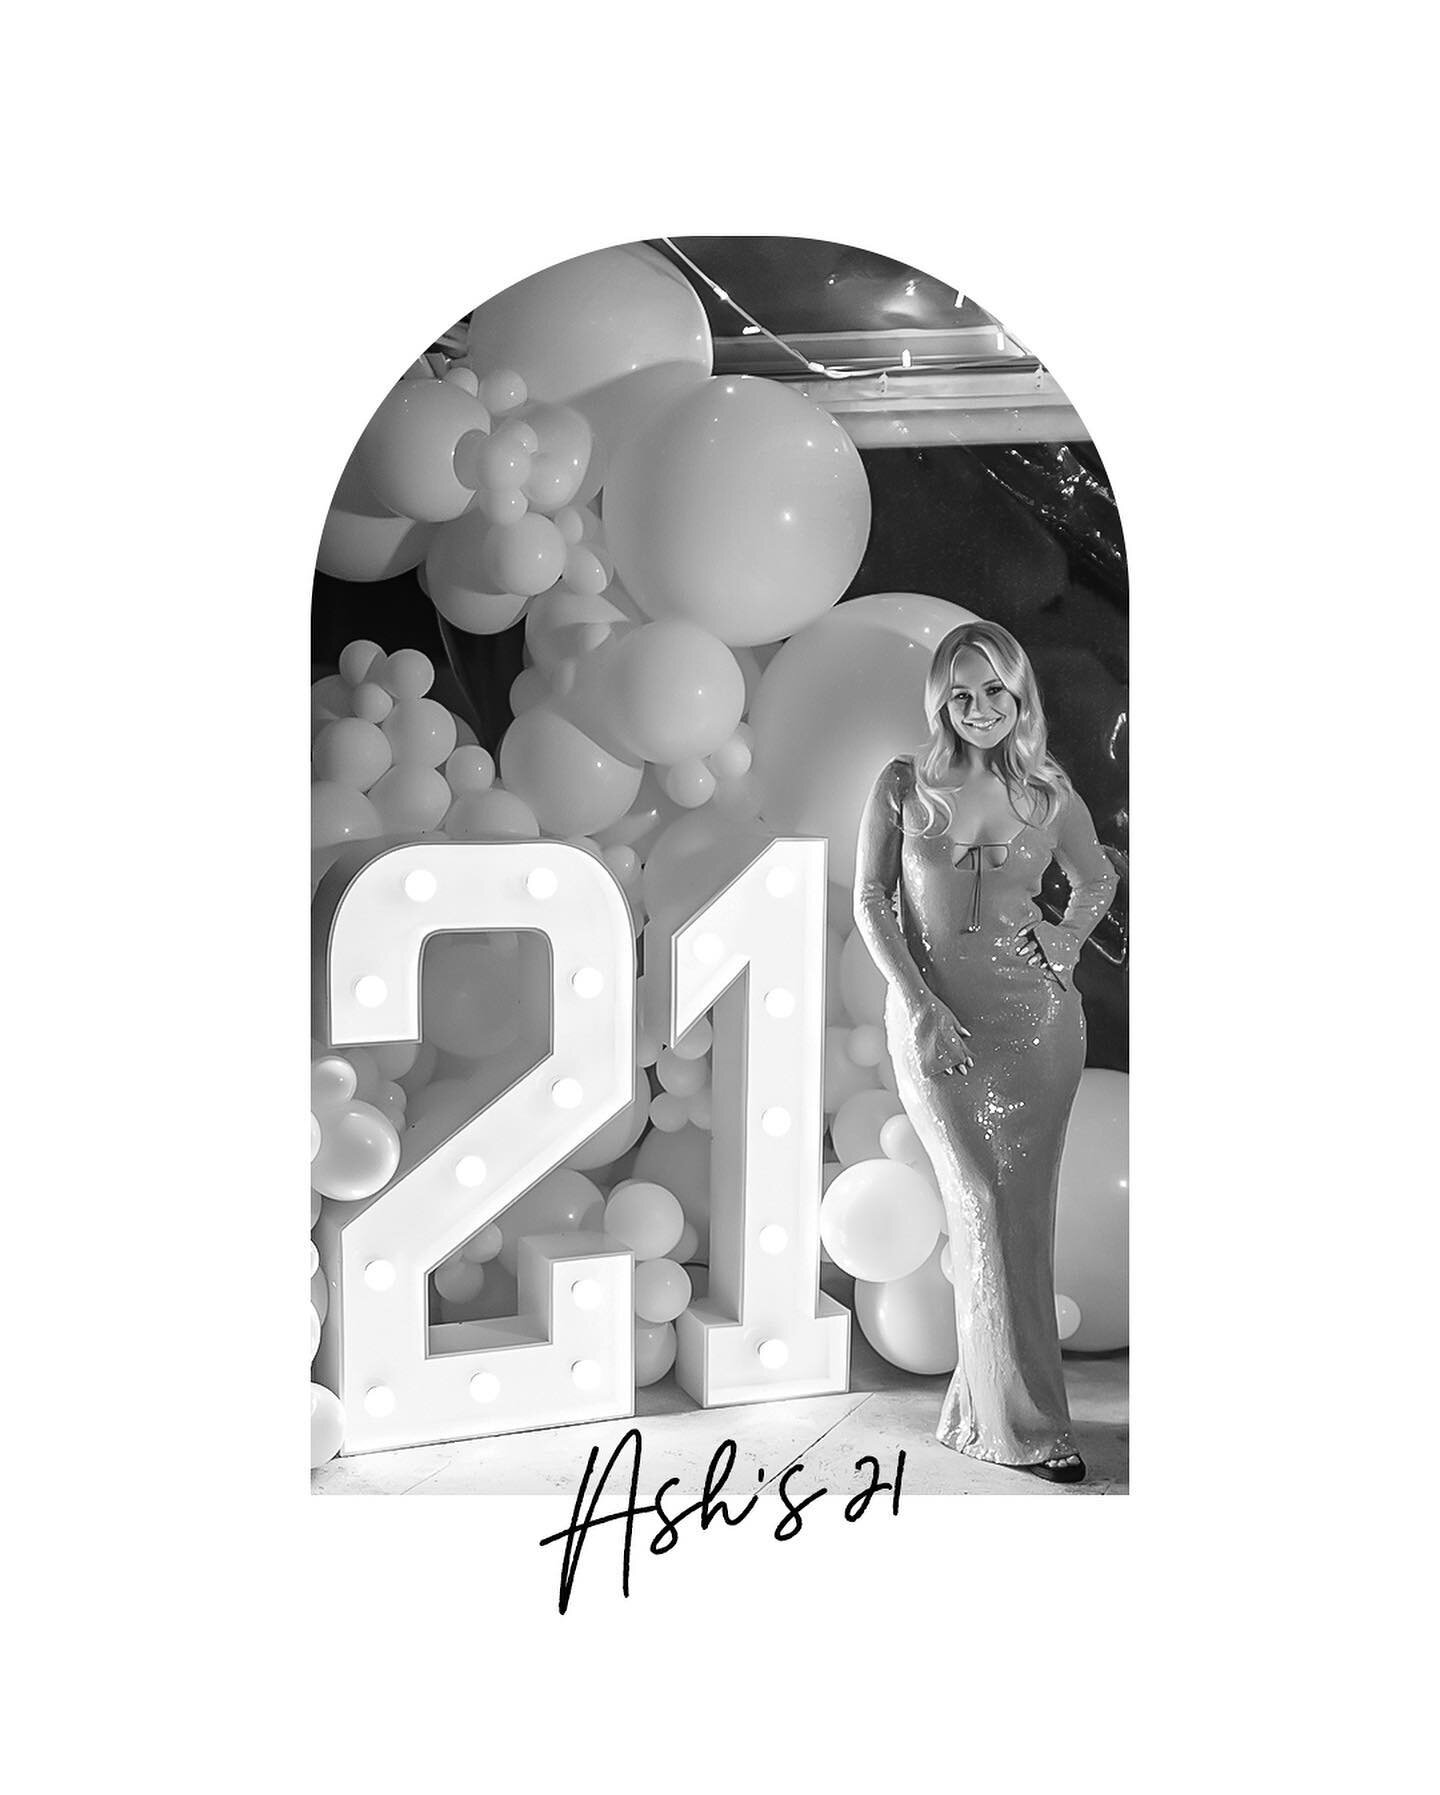 🥳 Remembering a #SpecialNight! 🥳

It was the night Ashlee turned #21, and it was a beautiful celebration, with #friends &amp; #family, full of joy and laughter. And of course, our #Hipstabooth was there capturing some fun memories from the night 😍